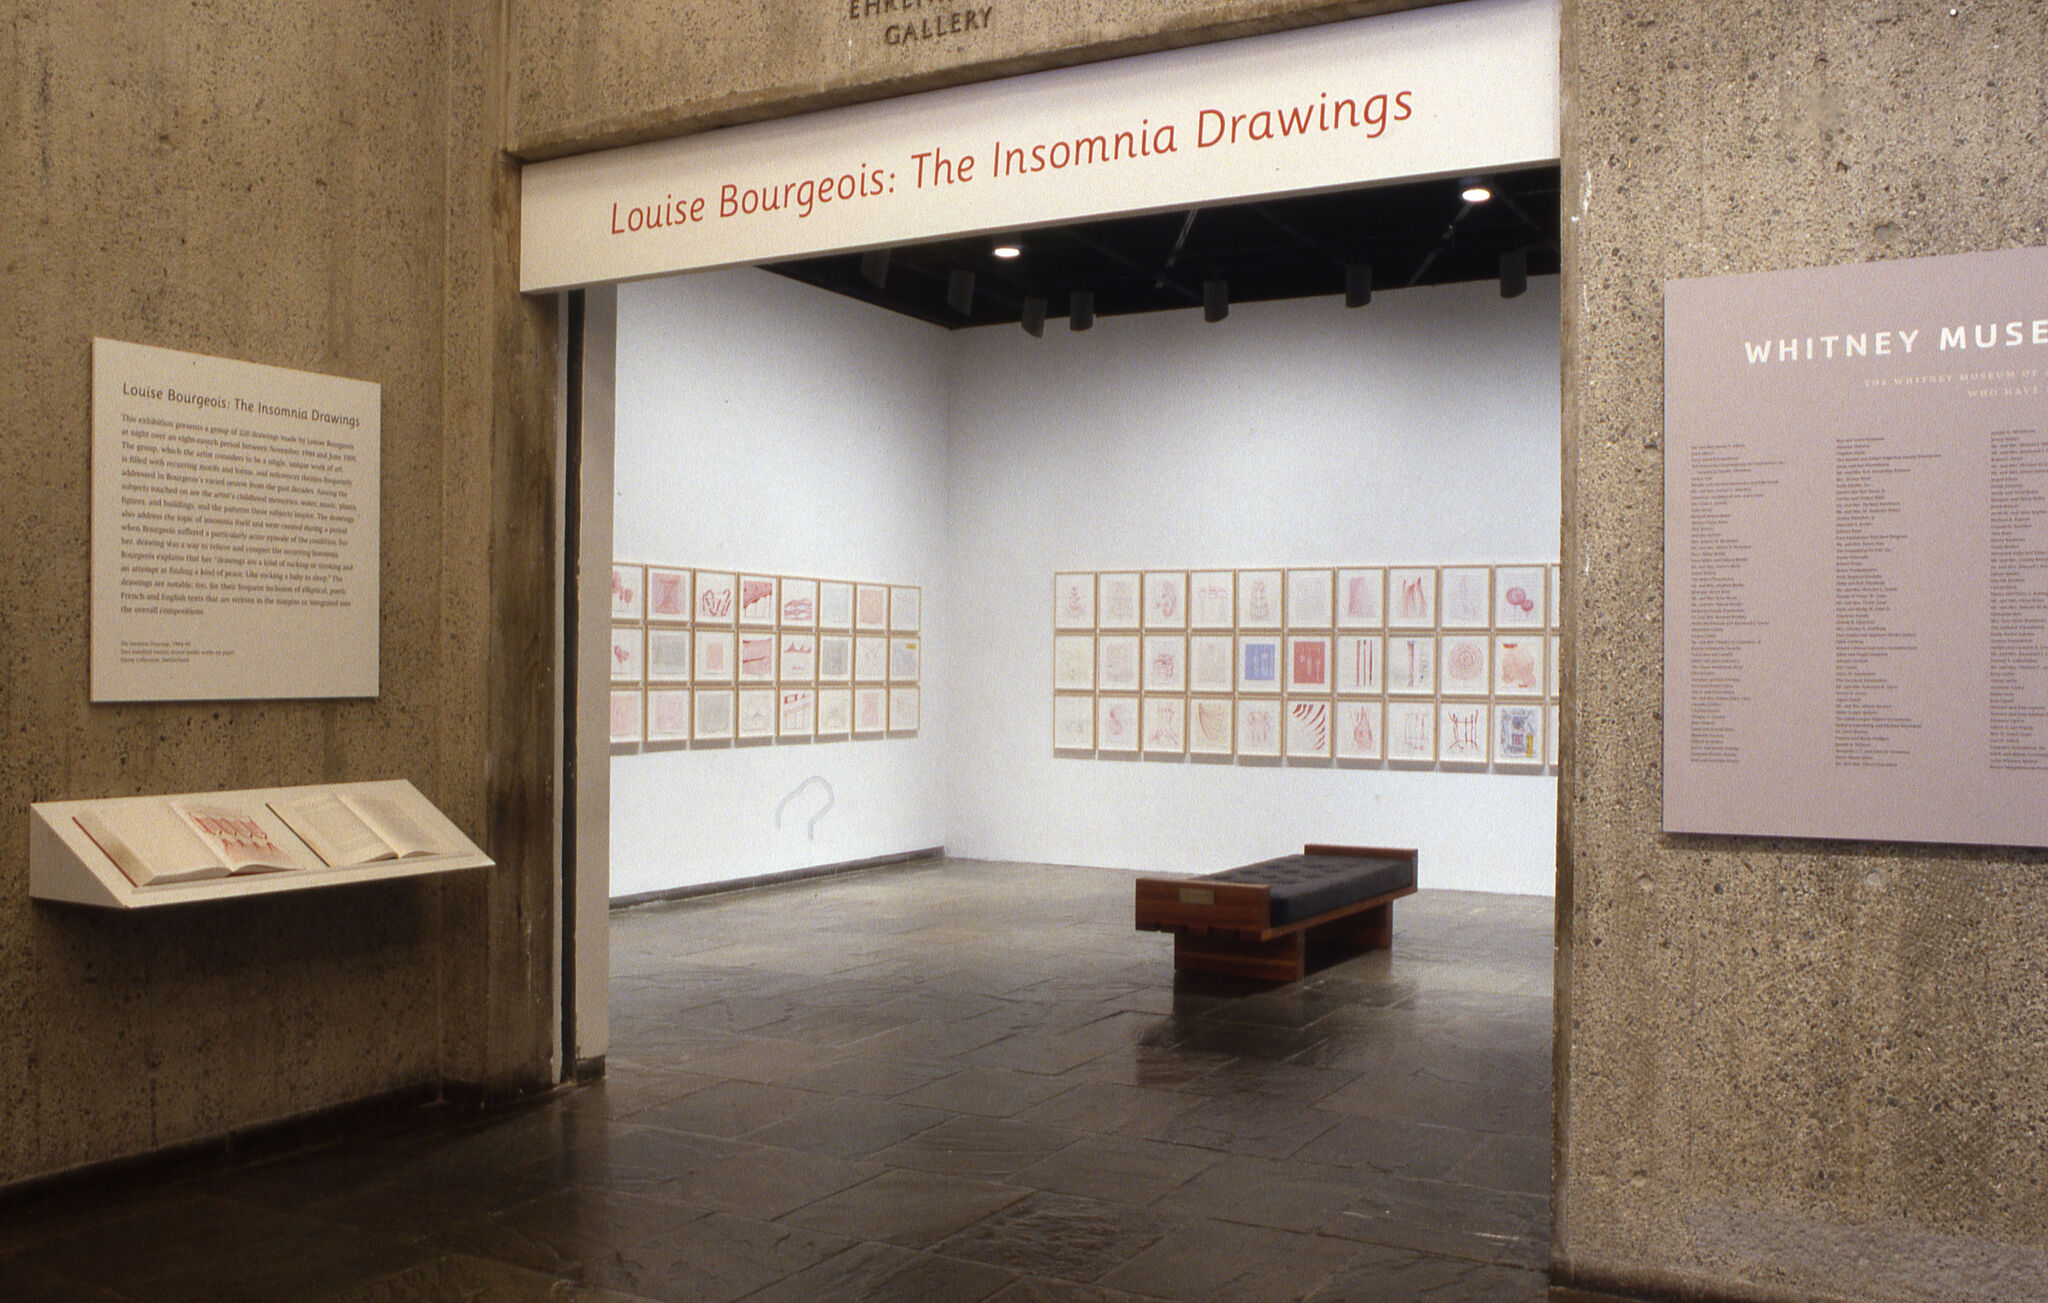 The entrance to Louise Bourgeois: The Insomnia Drawings exhibition.